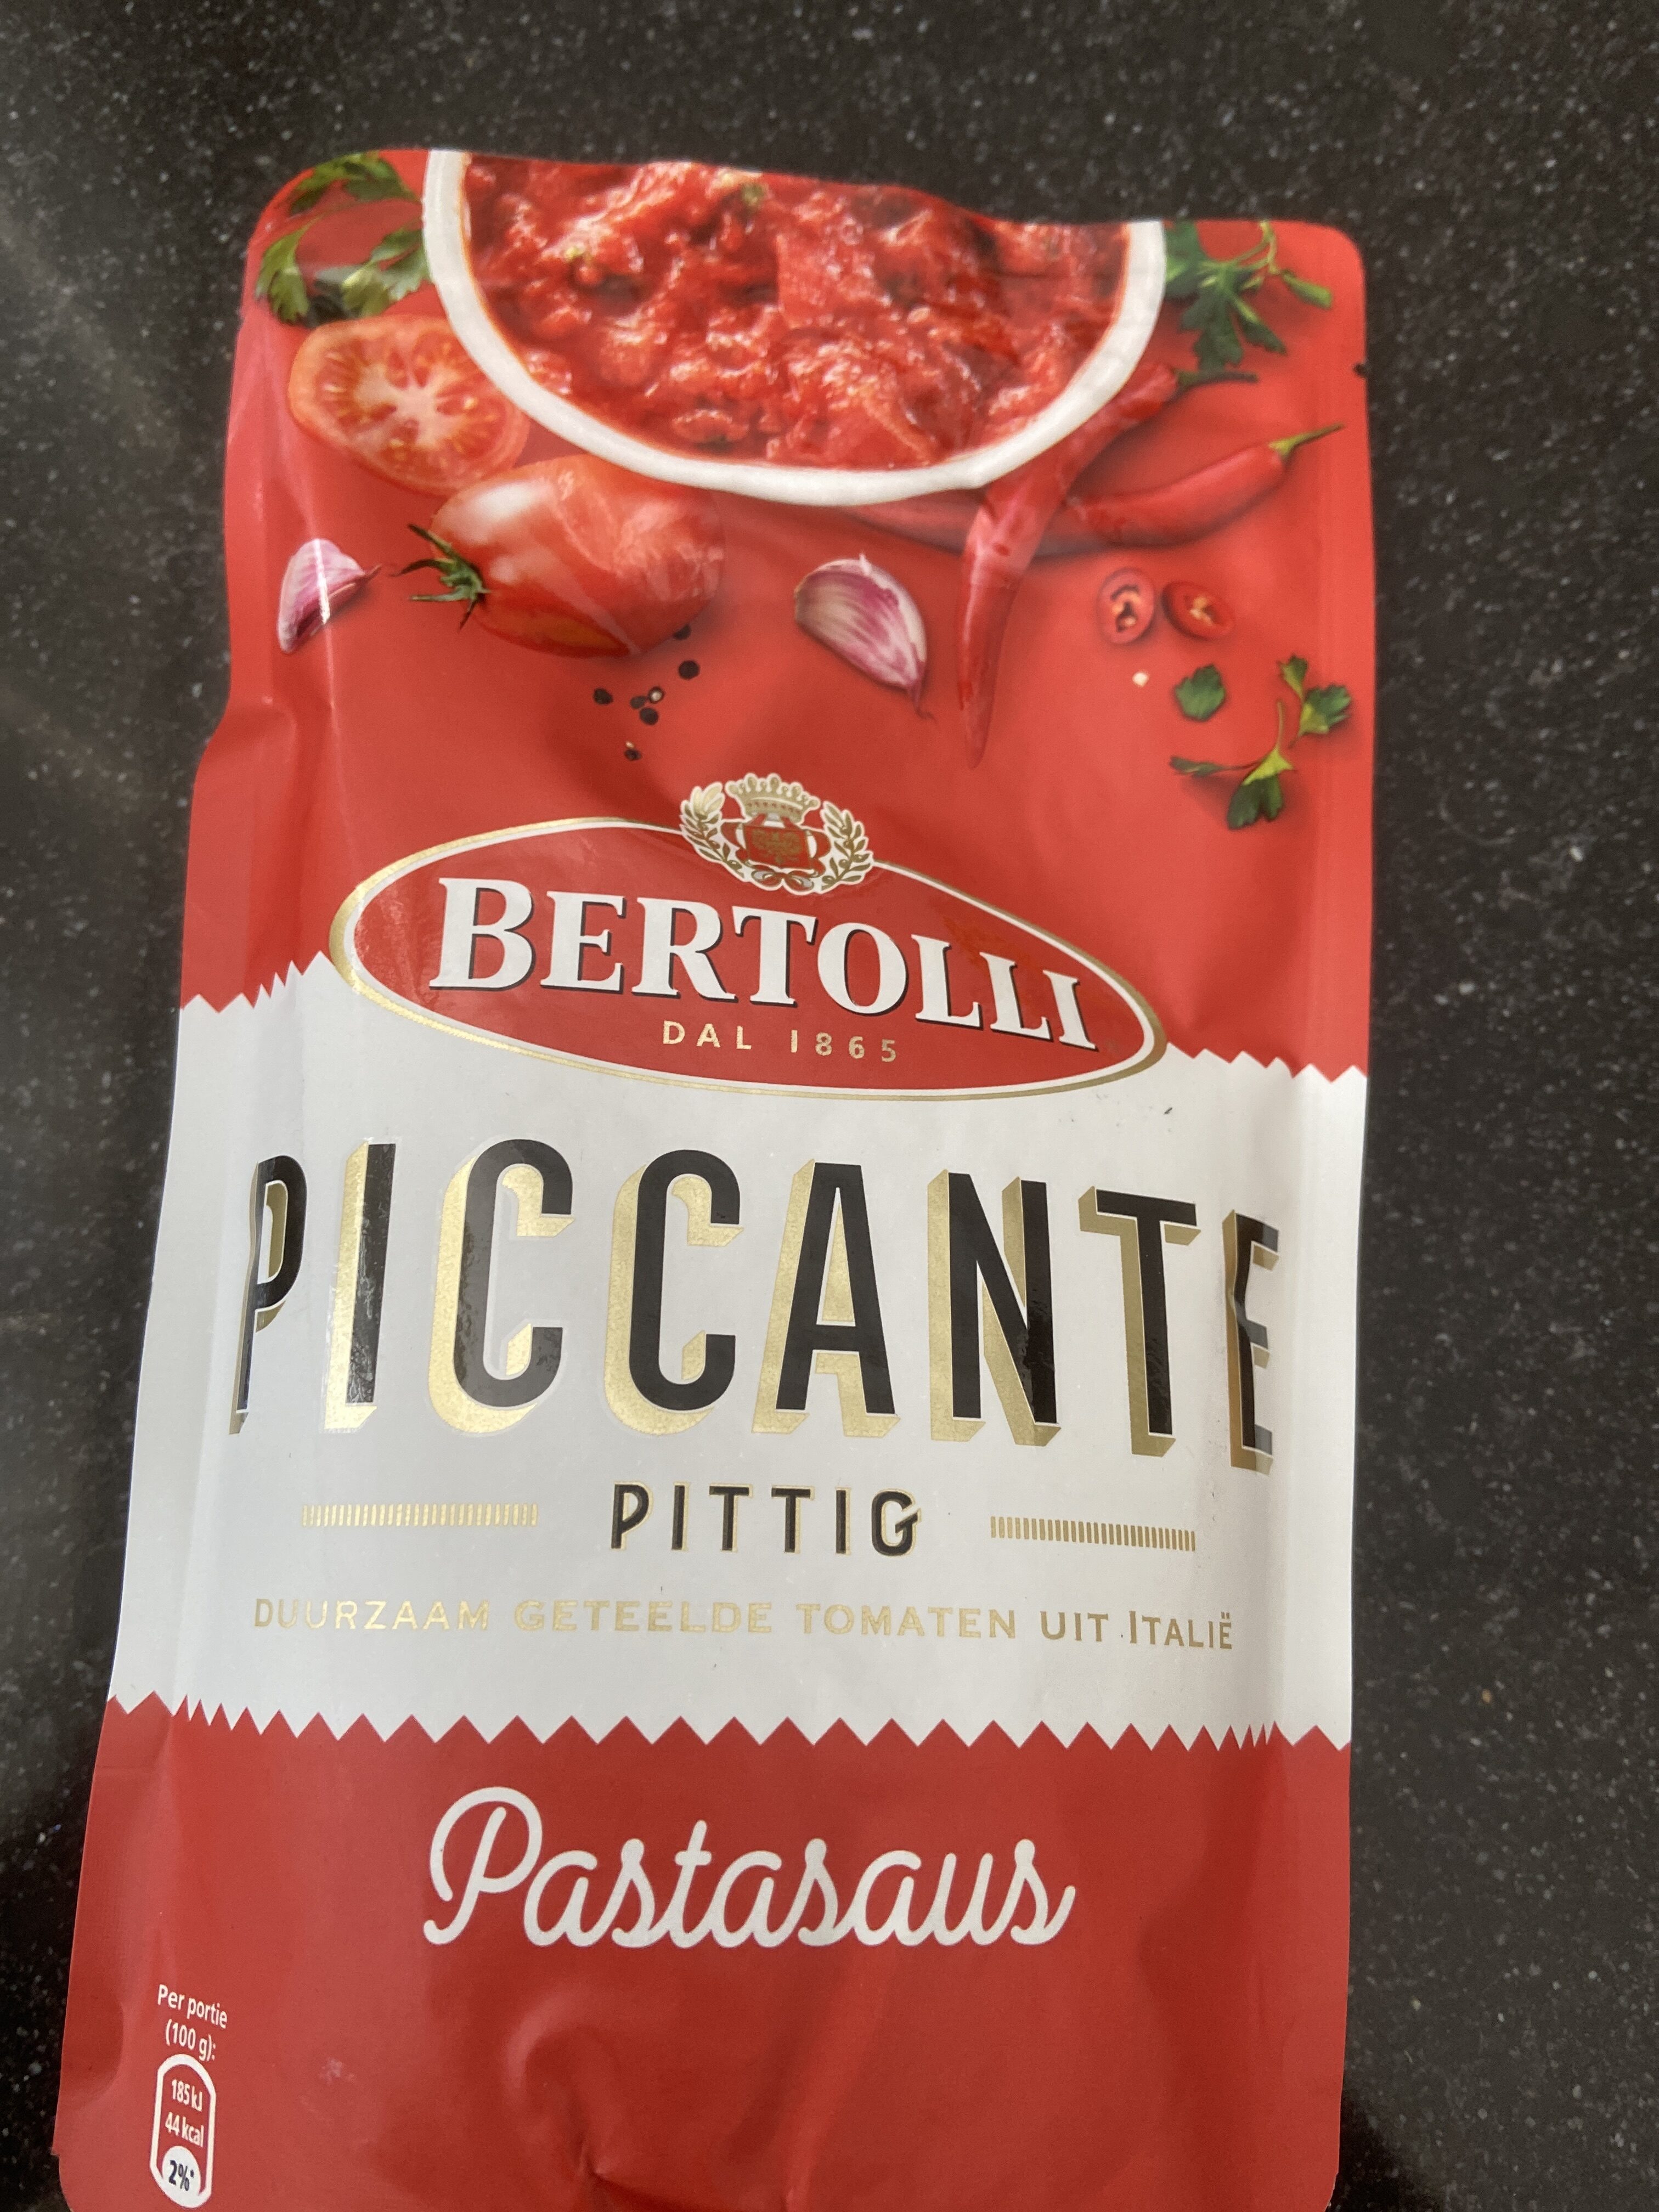 Piccante - Product